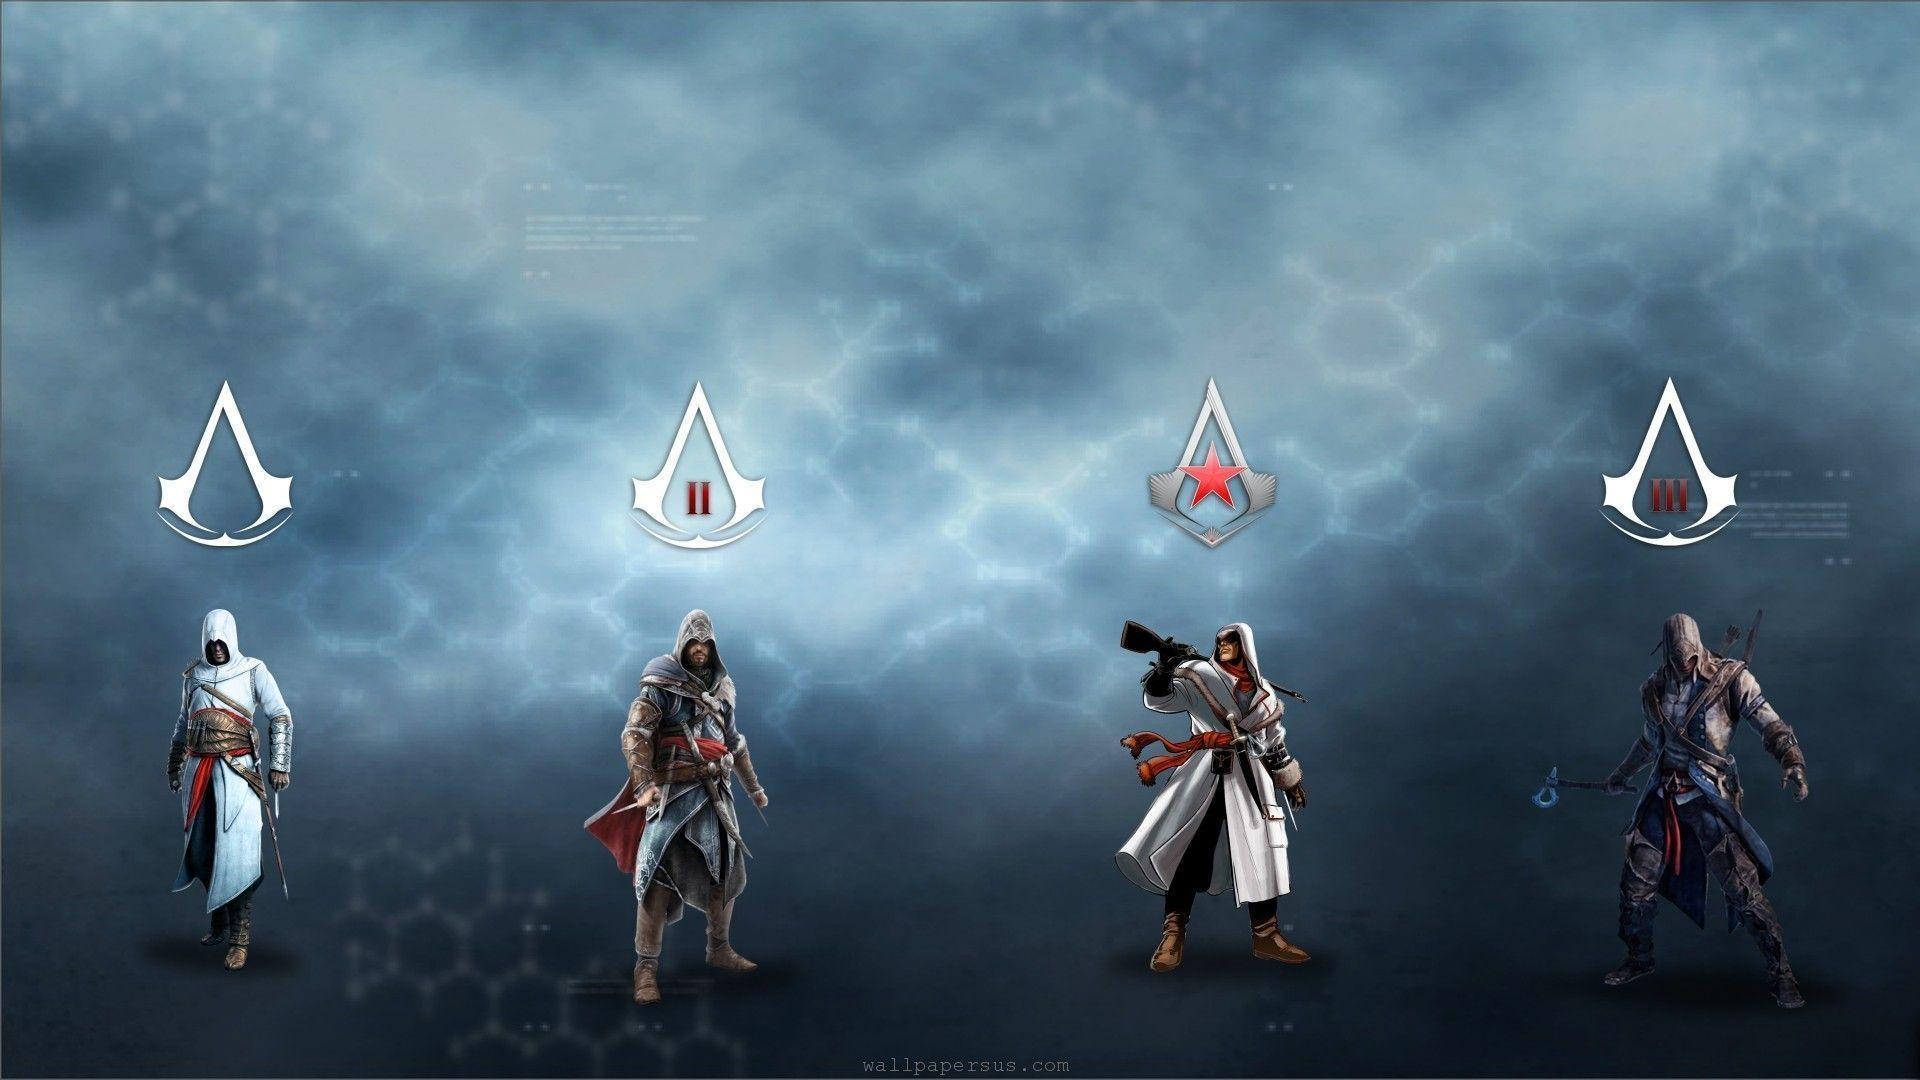 Download Assassin&;s Creed III (1151) Full Size. Game Wallpaper